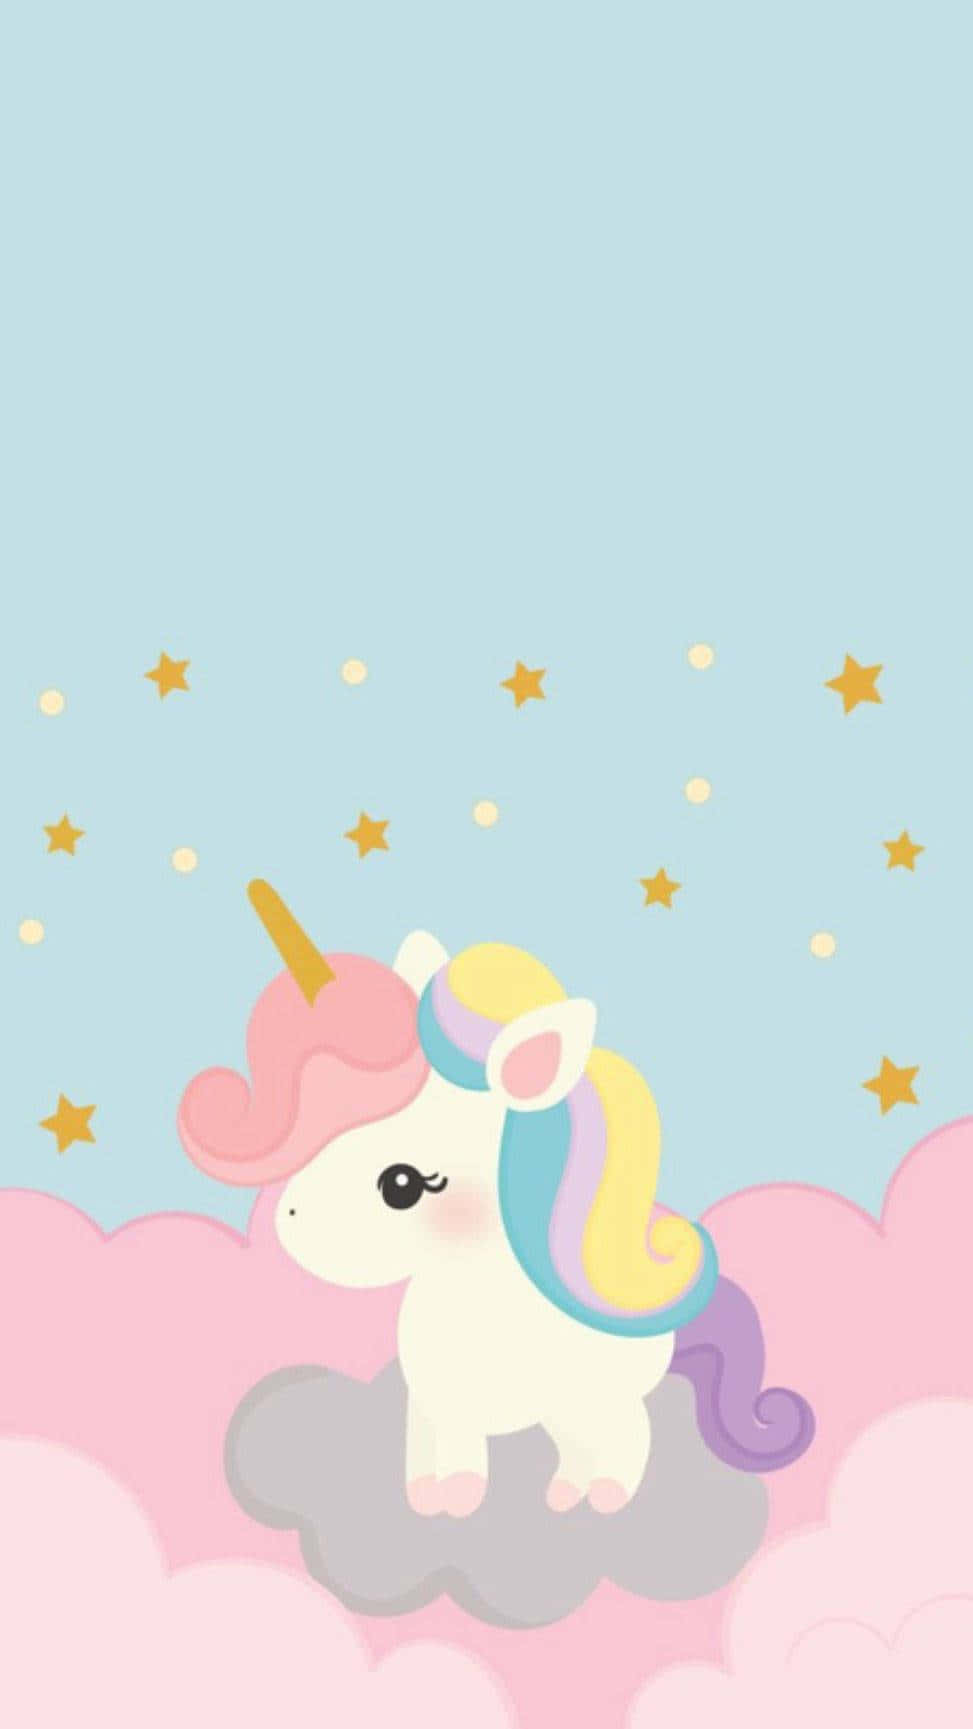 A Cute Unicorn On A Cloud With Stars Wallpaper